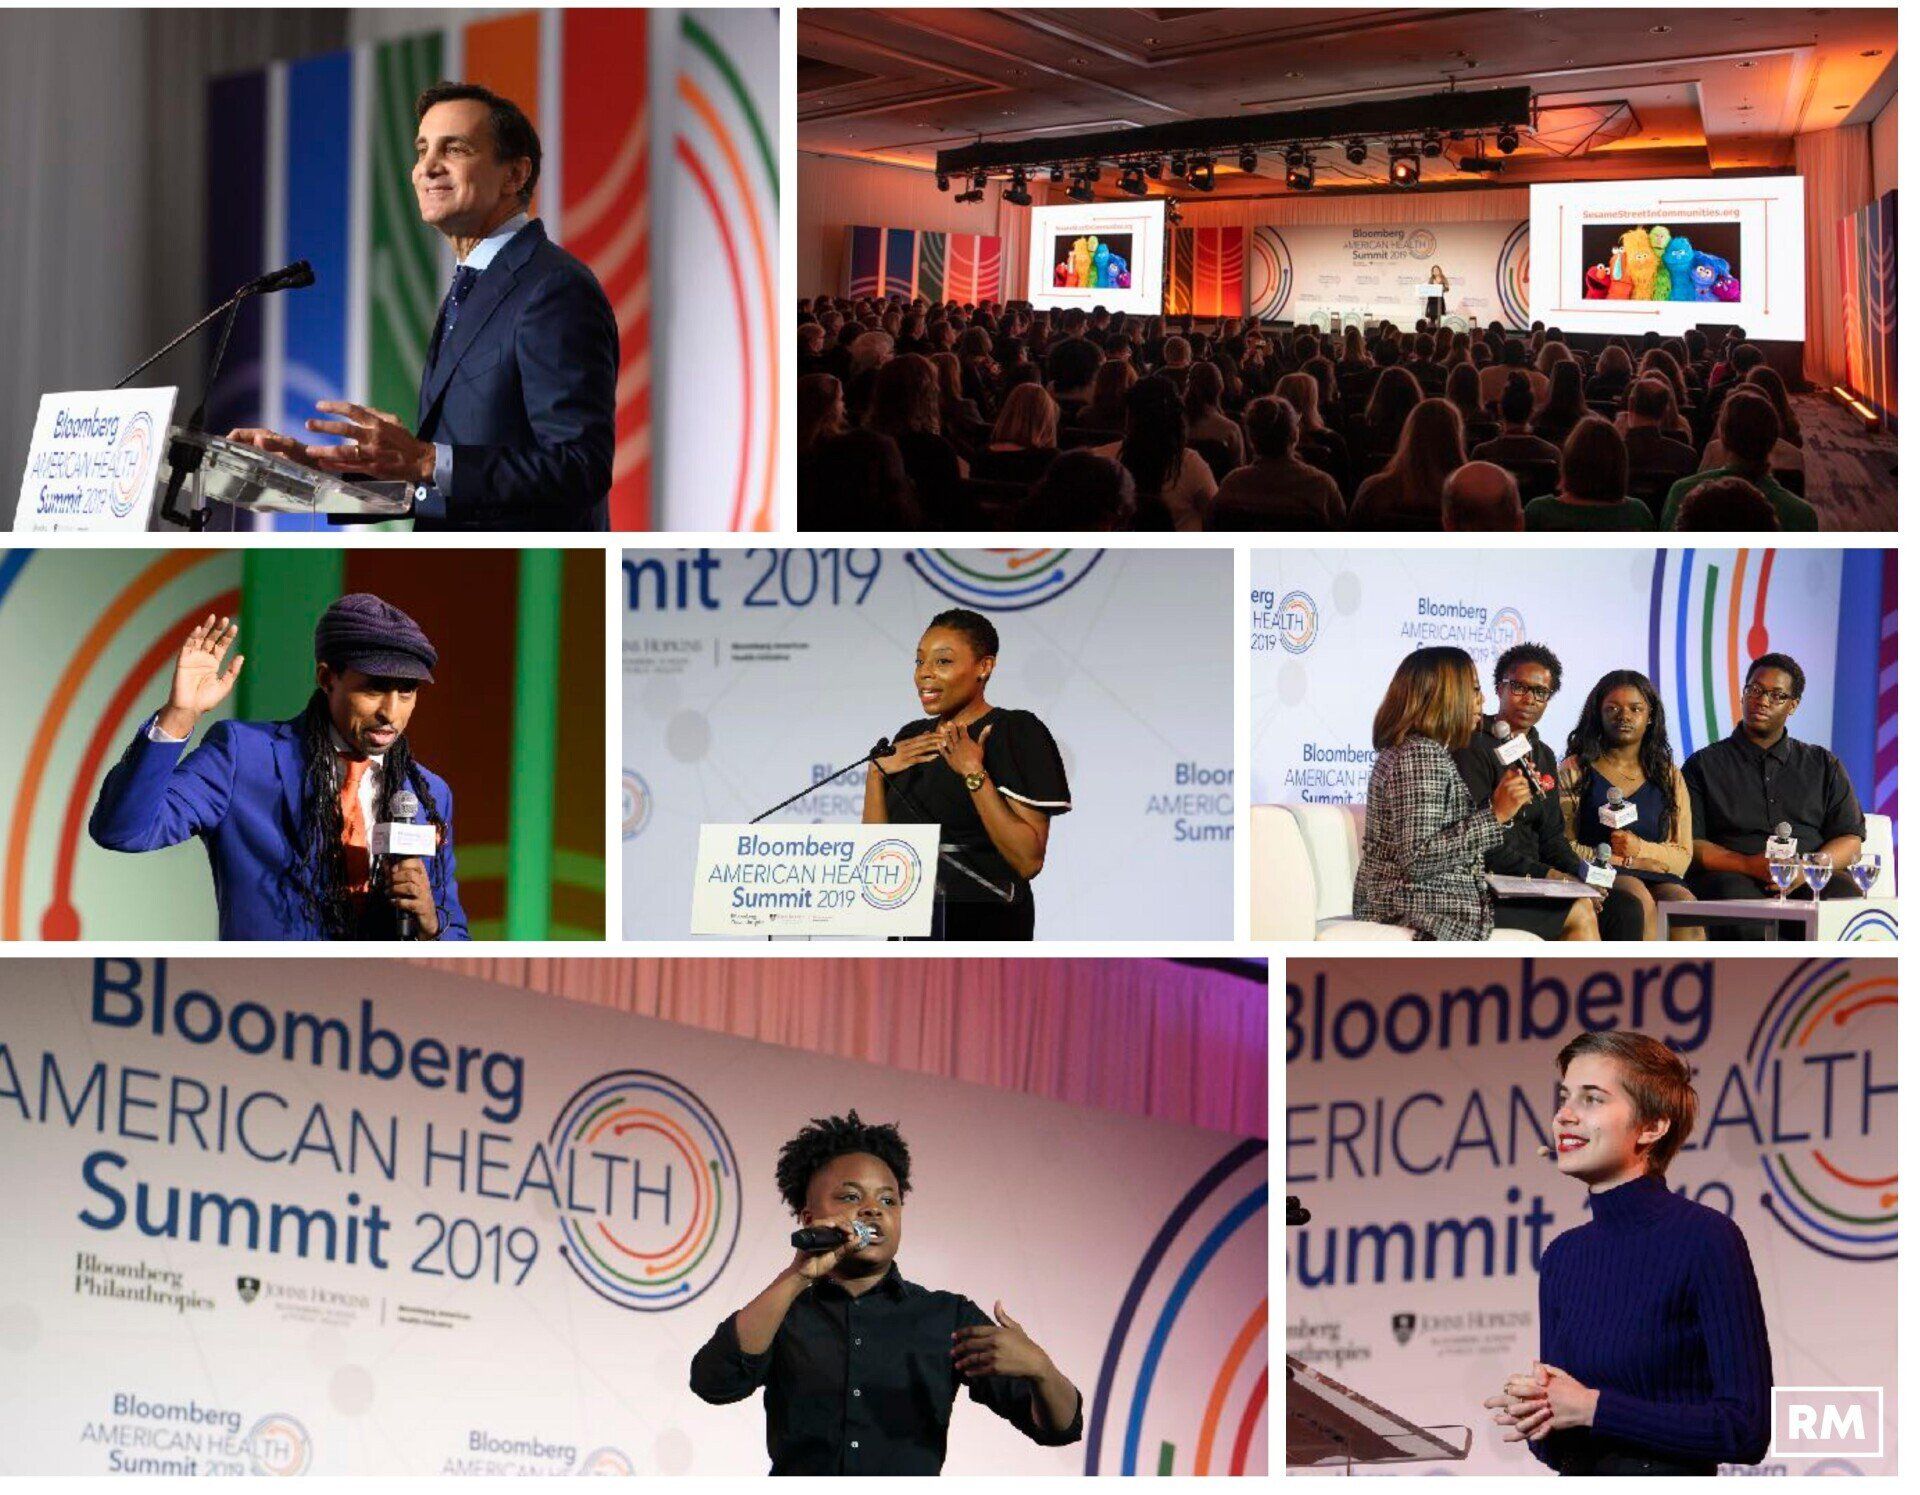 A collage photo of people attending Bloomberg American Health Summit 2019